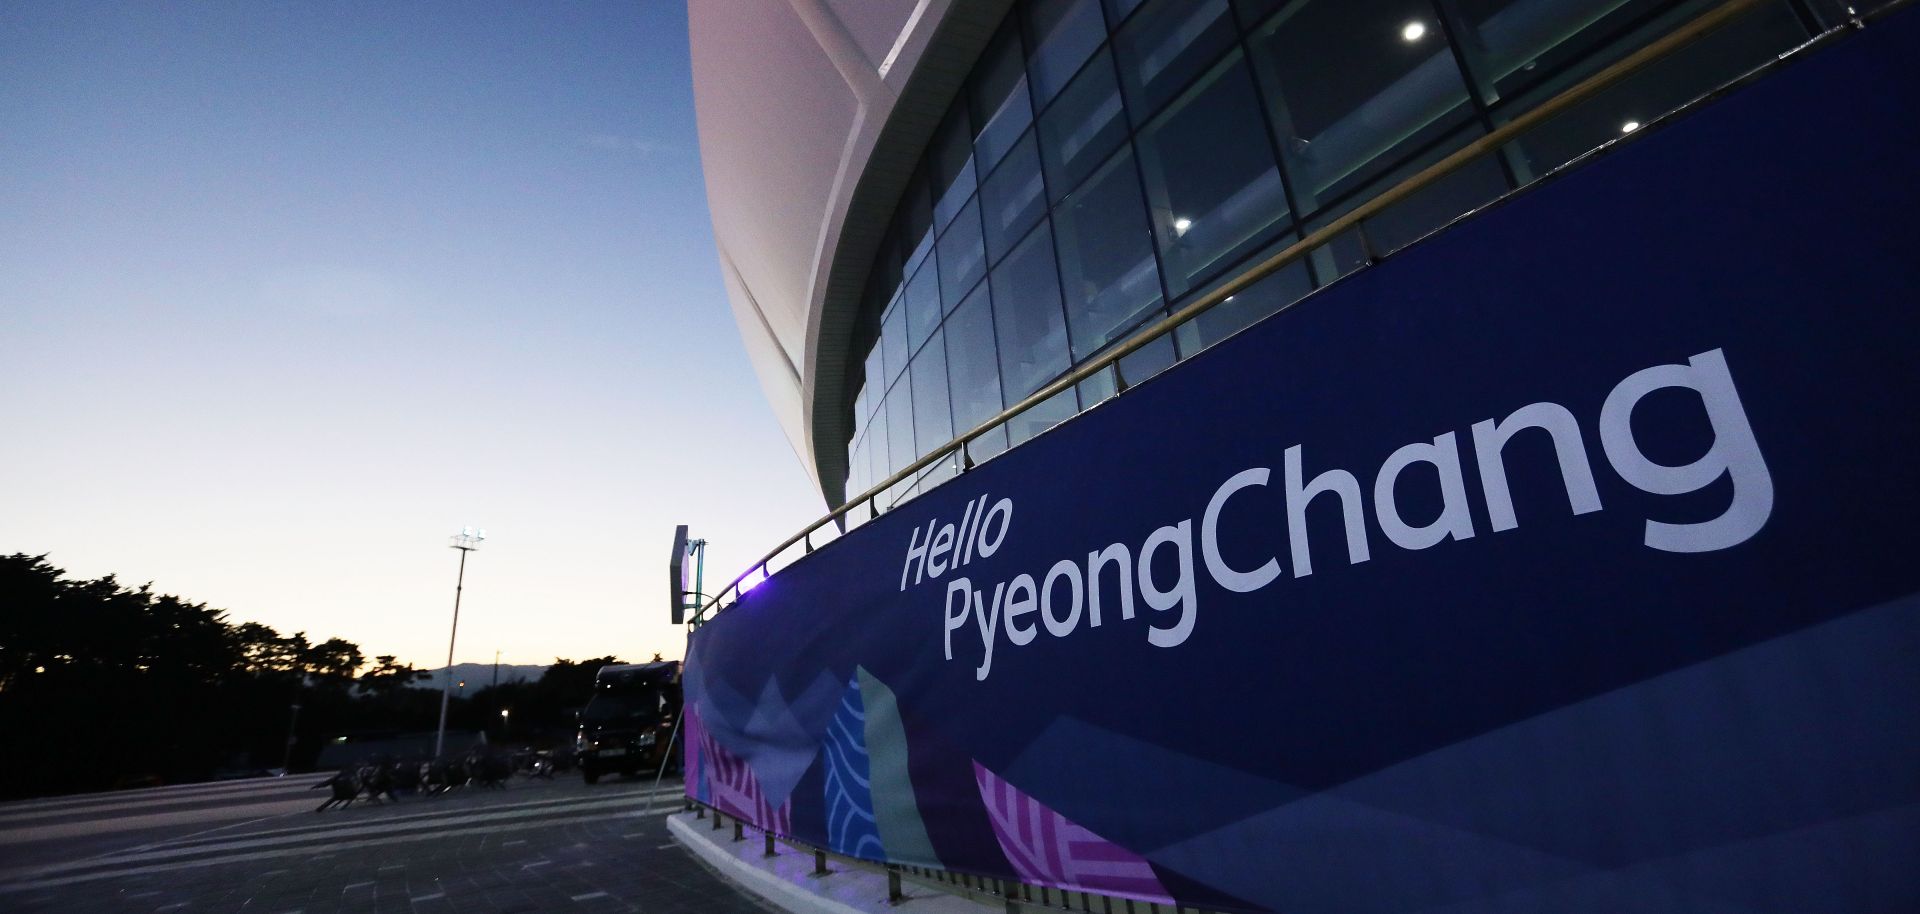 North and South Korea will march under a unified banner as the Winter Olympics kick off in Pyeongchang, South Korea.